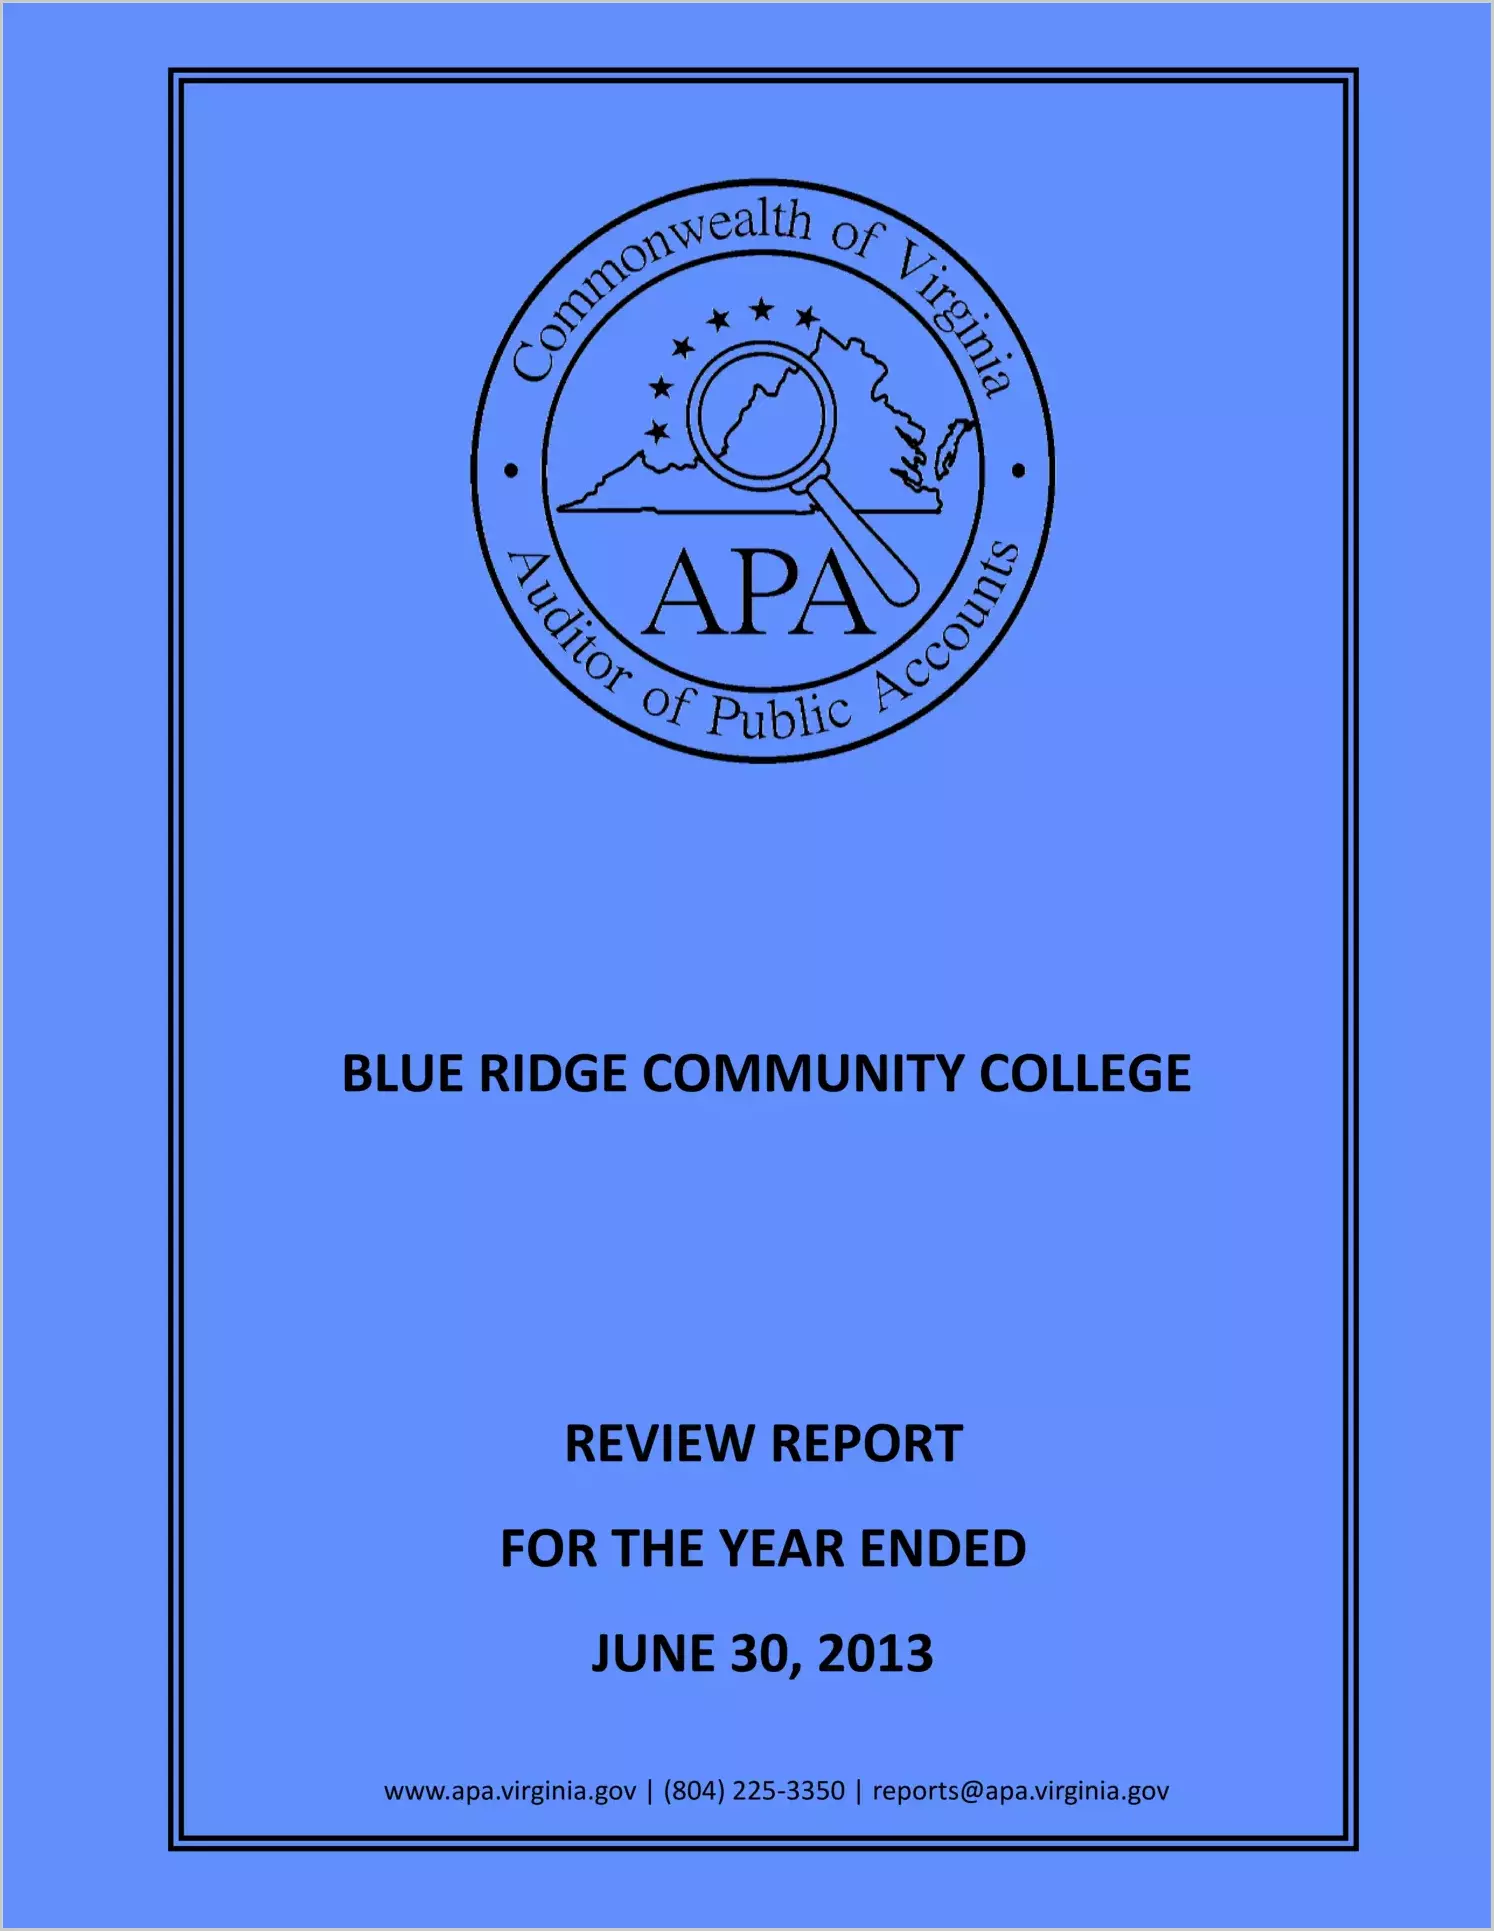 Blue Ridge Community College for the year ended June 30, 2013